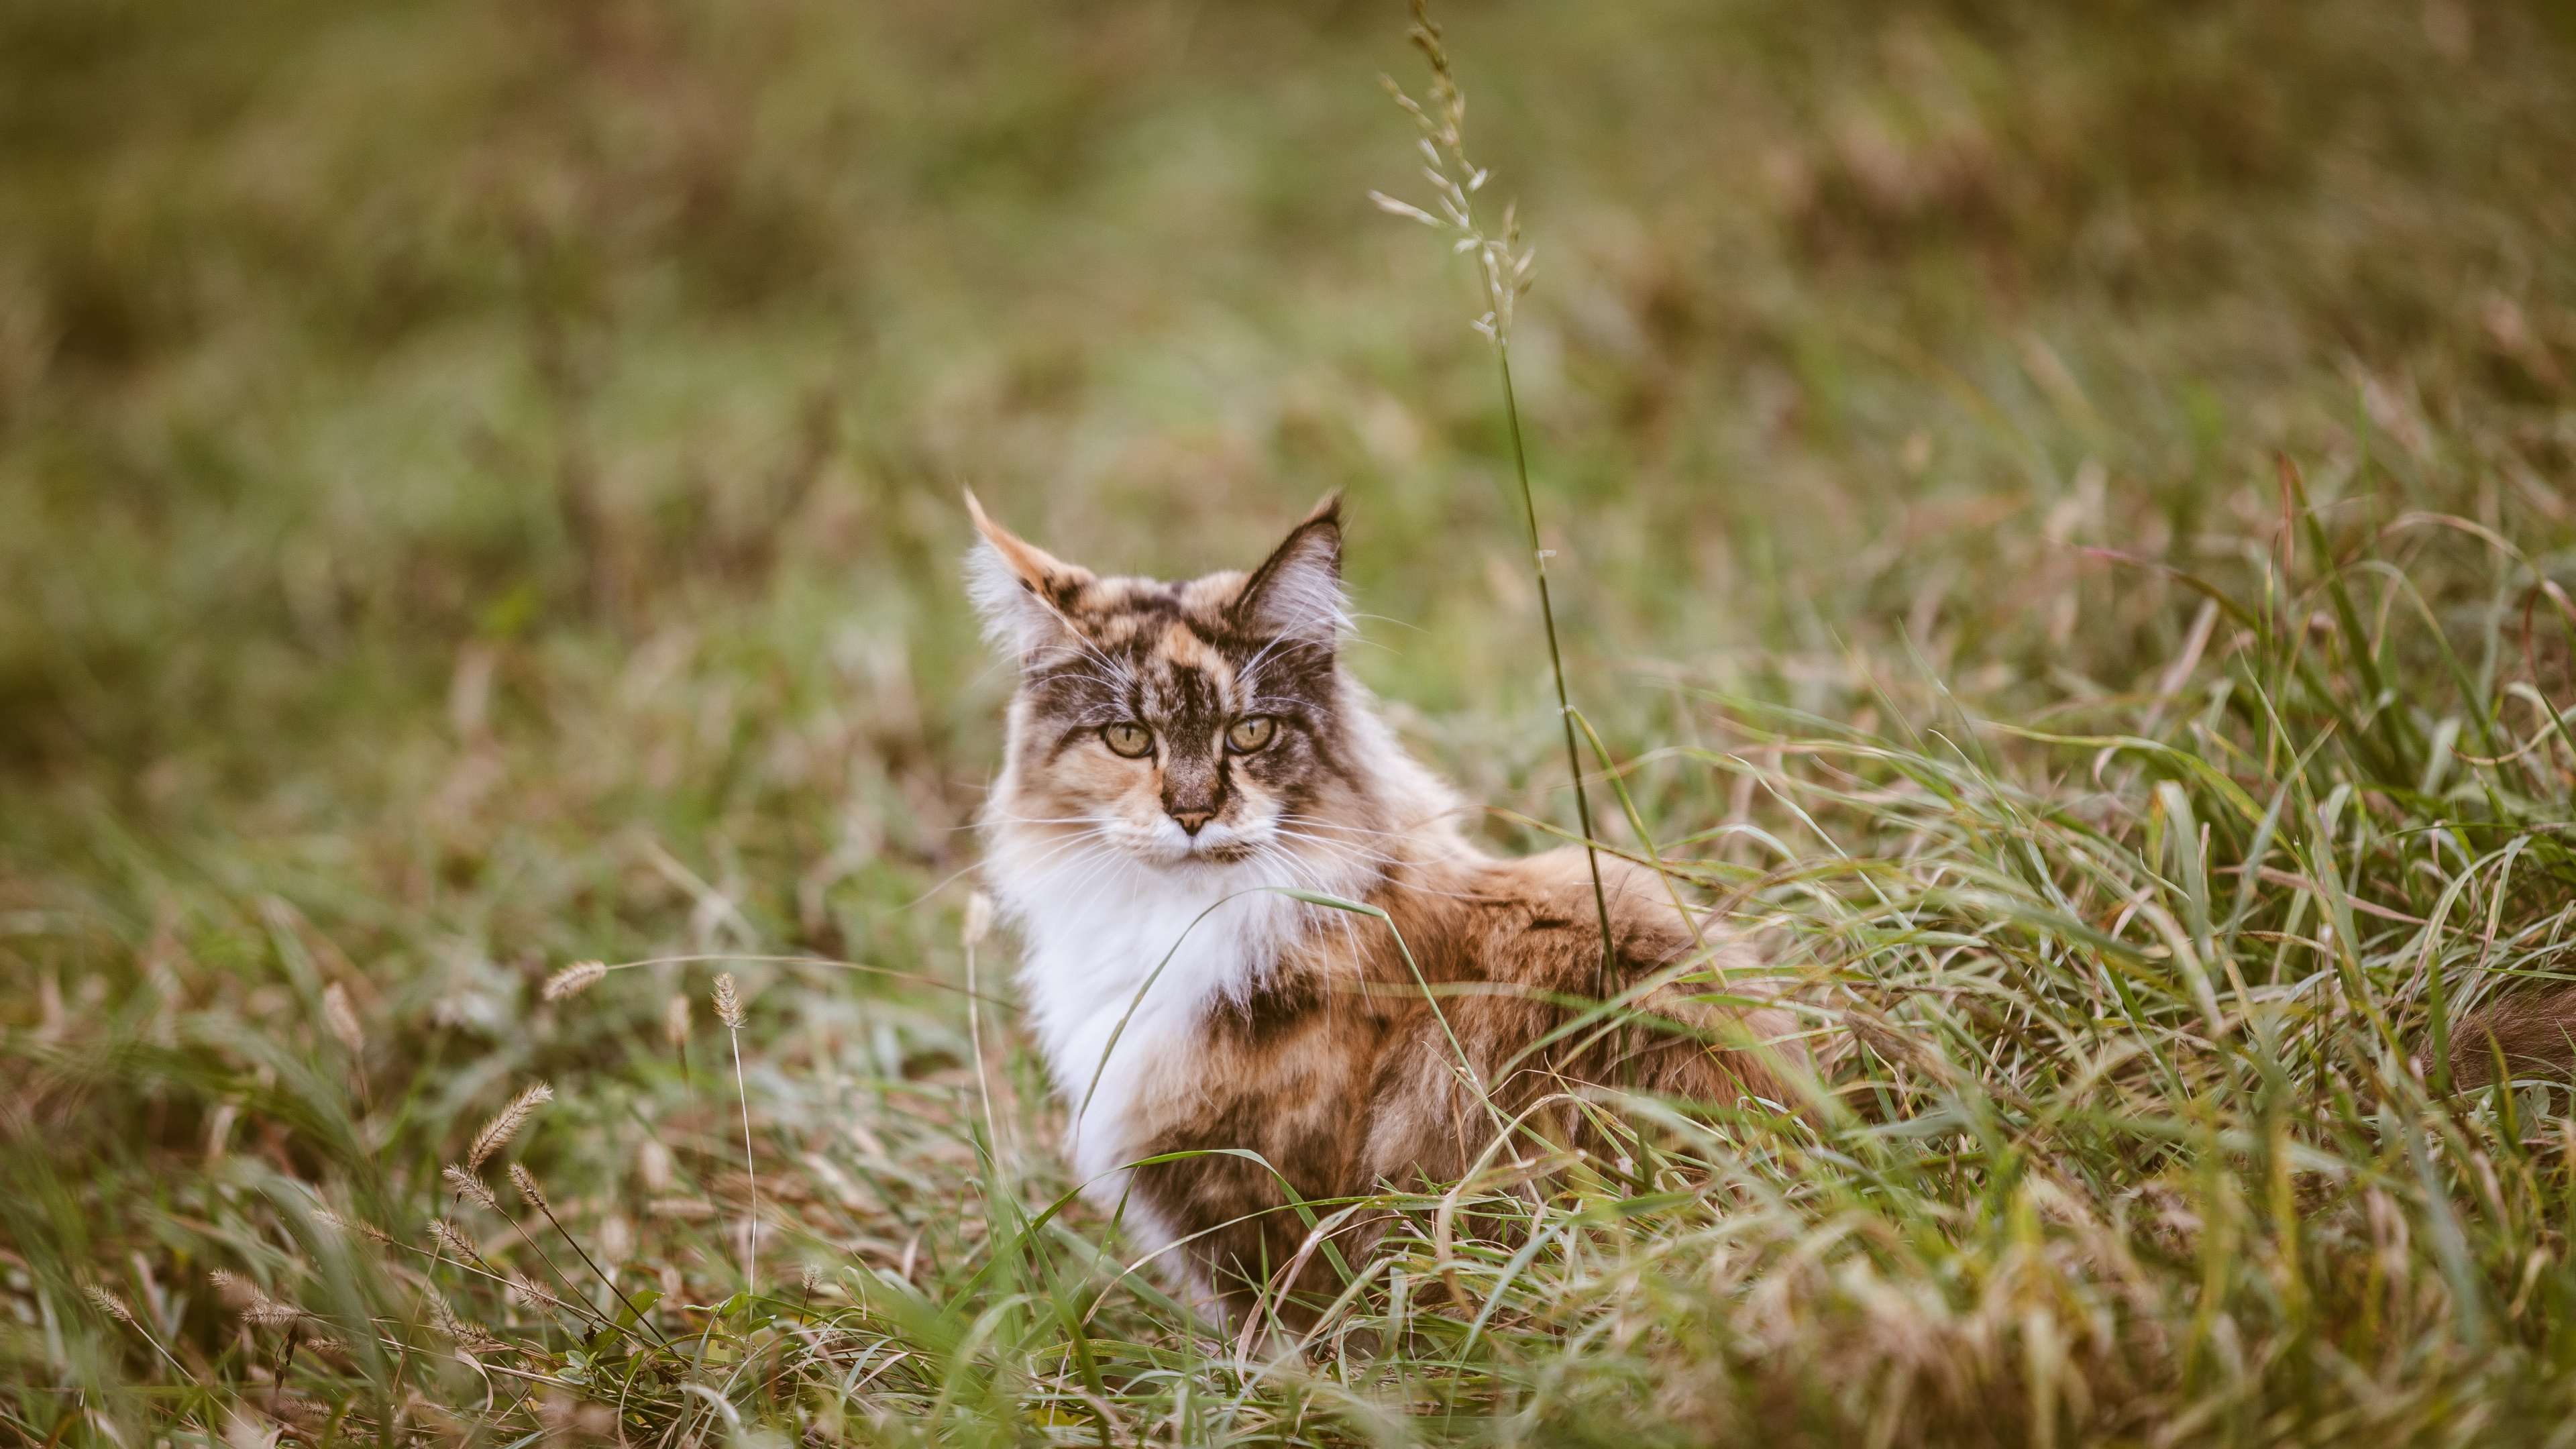 Brown and White Cat on Green Grass During Daytime. Wallpaper in 3840x2160 Resolution